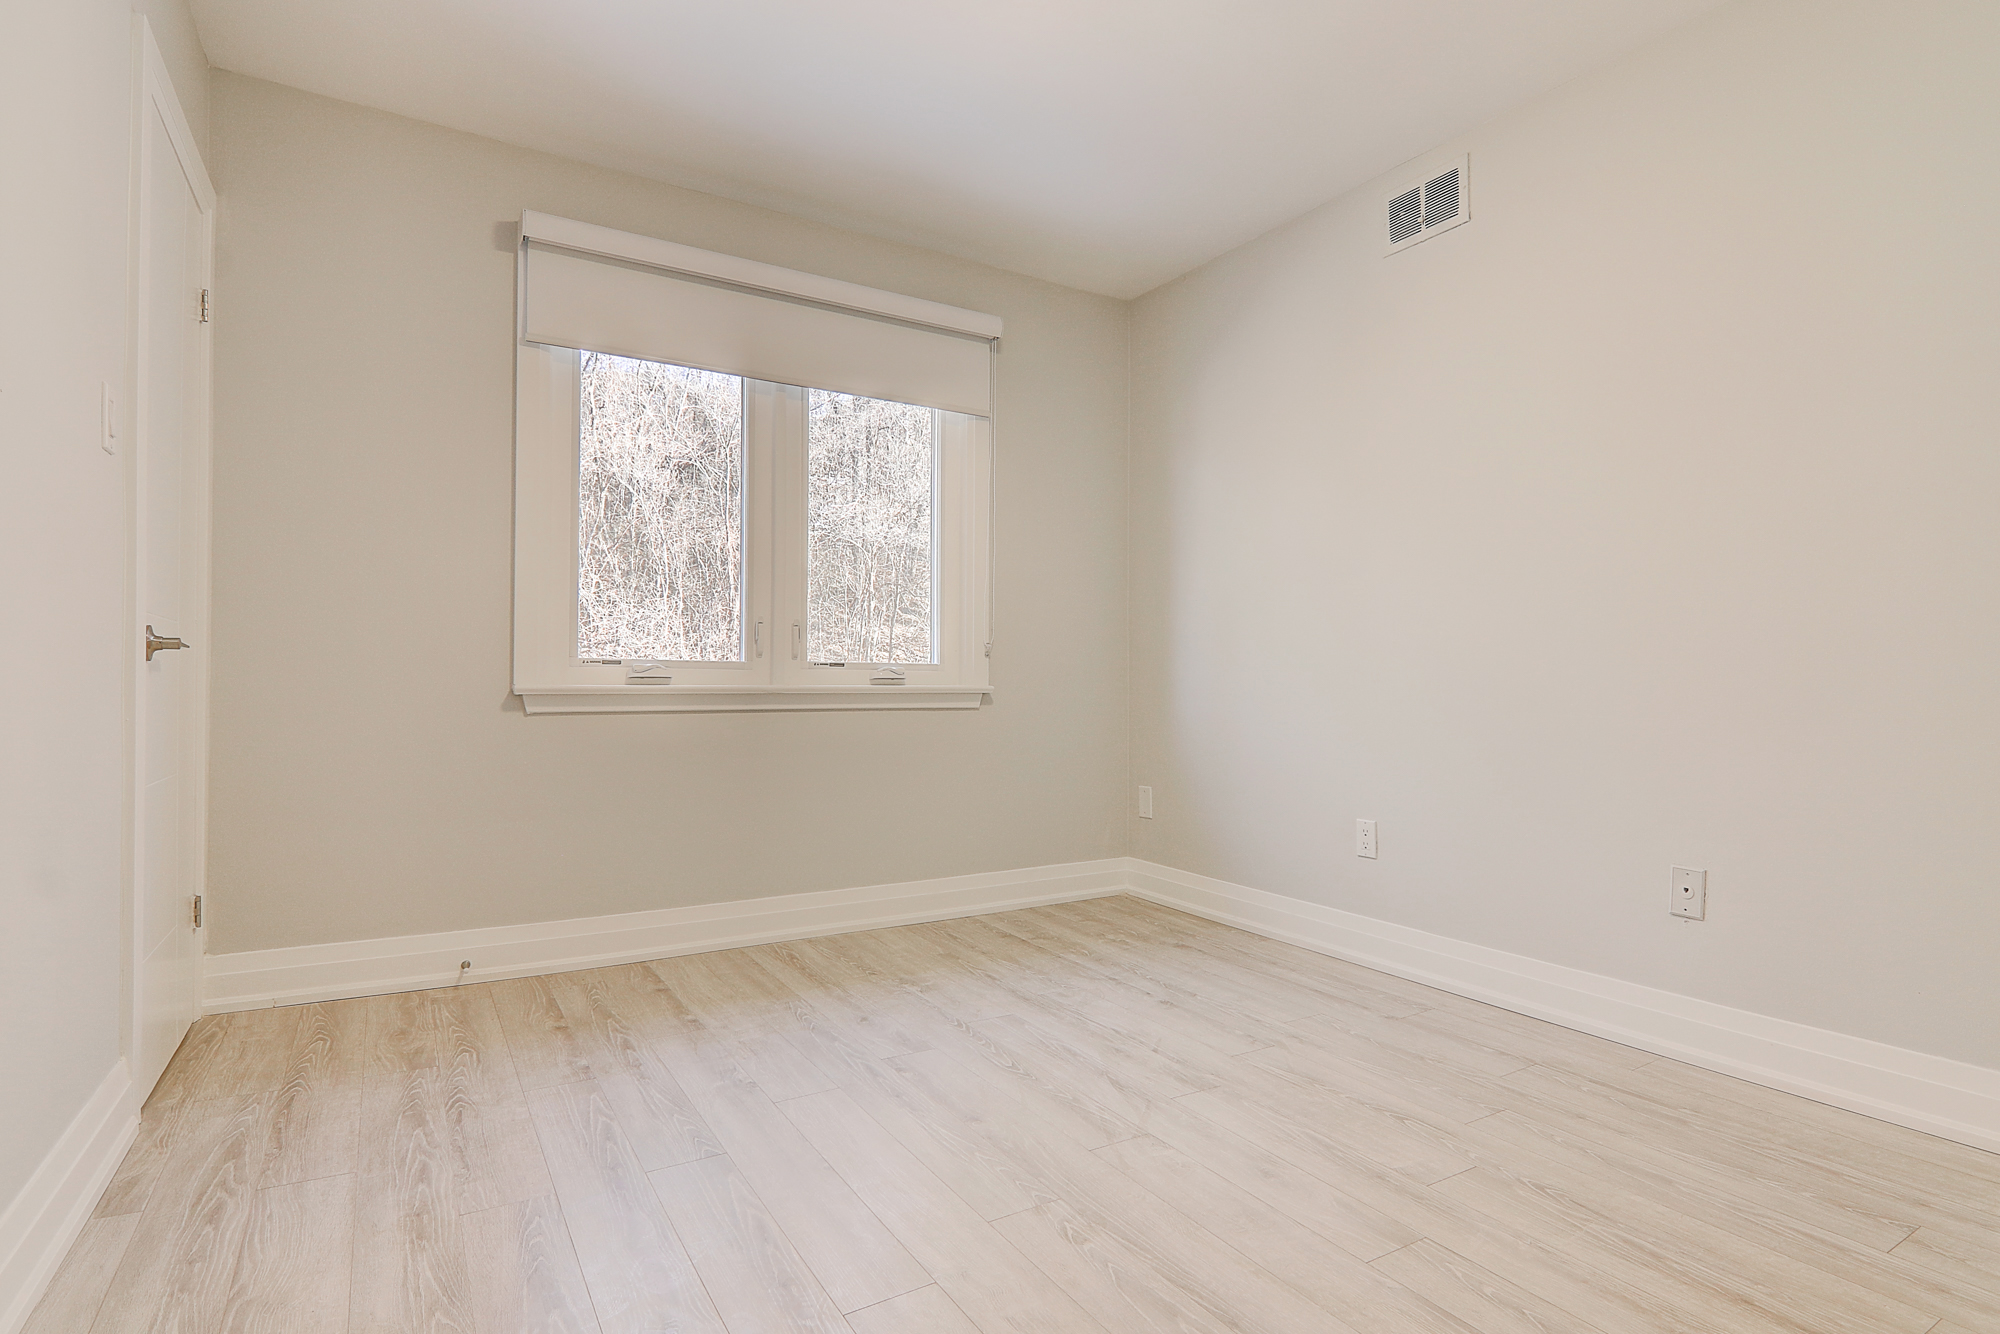 A room with a window and hardwood floor